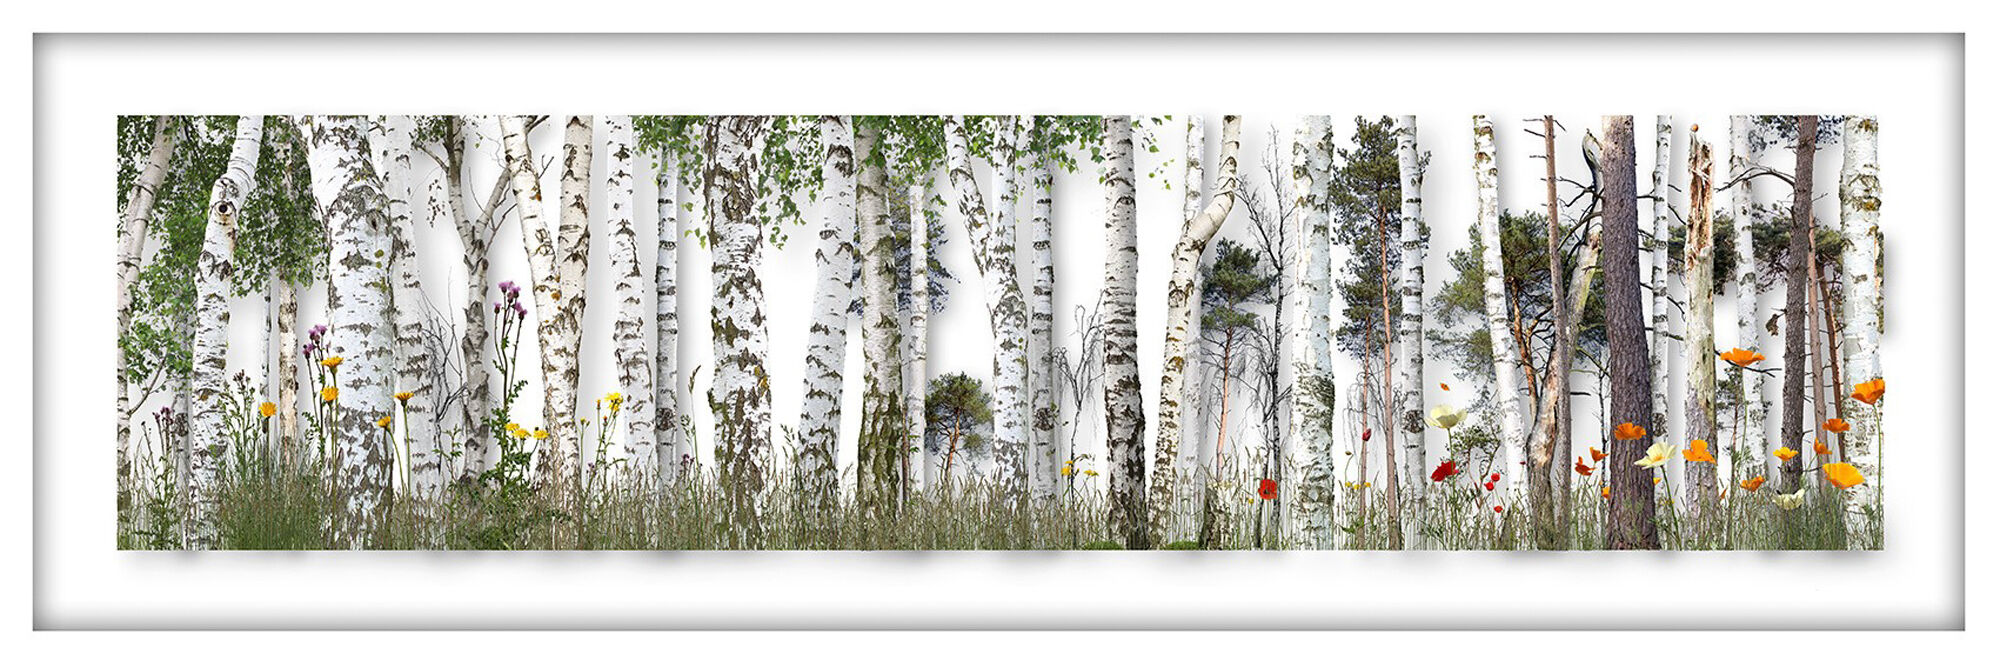 Picture "Birch-Pine Forest" (2020) by Andreas Lutherer